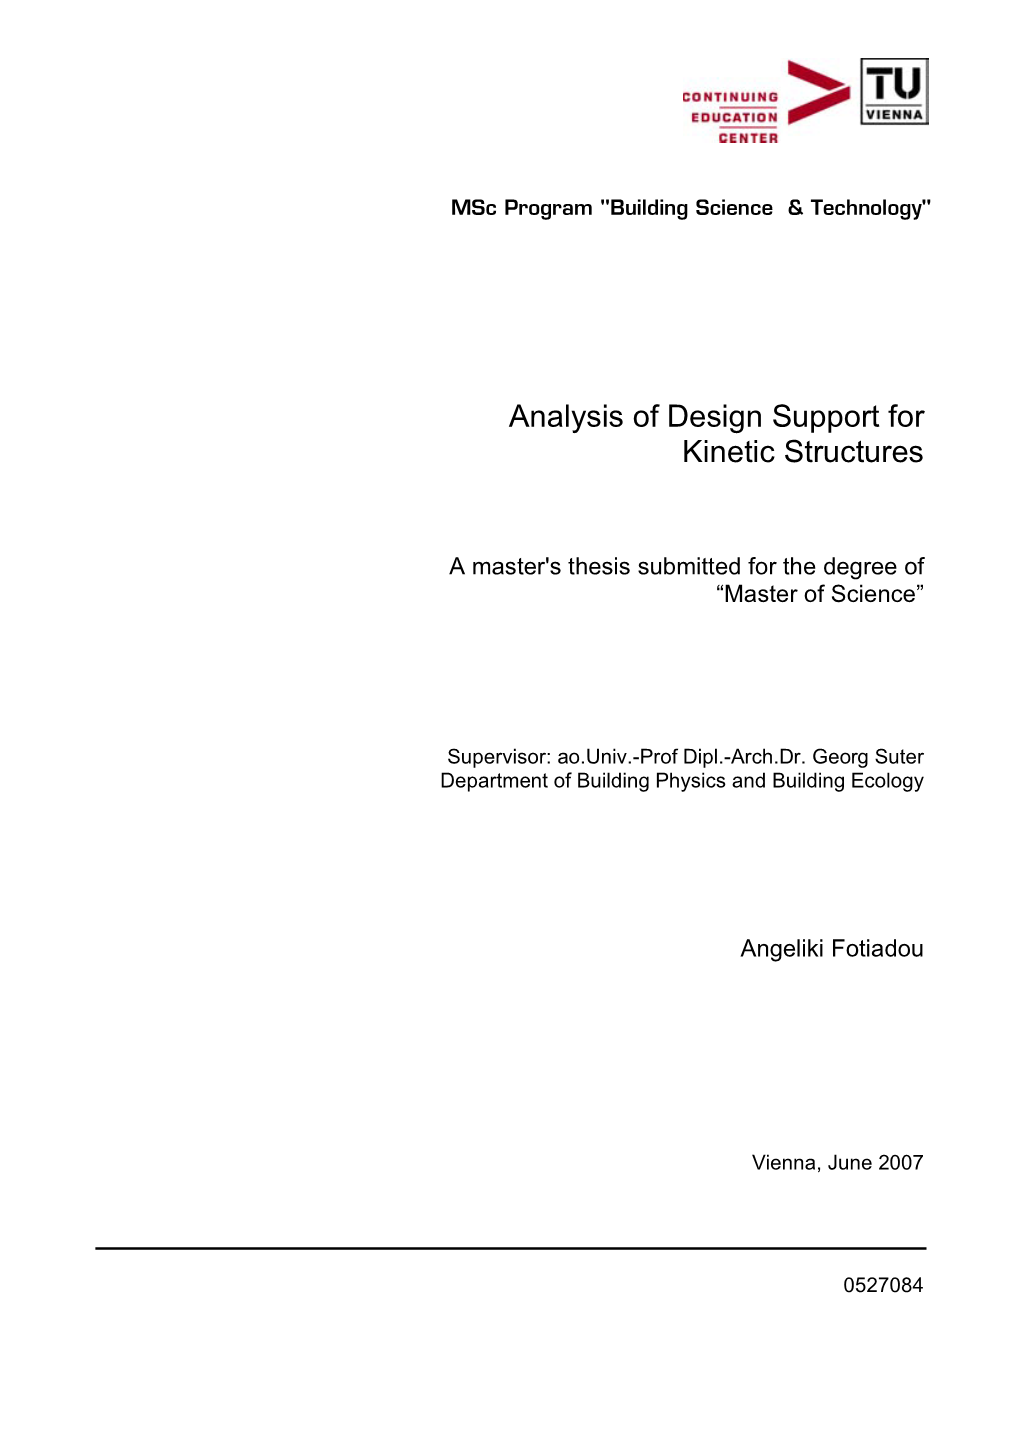 Analysis of Design Support for Kinetic Structures